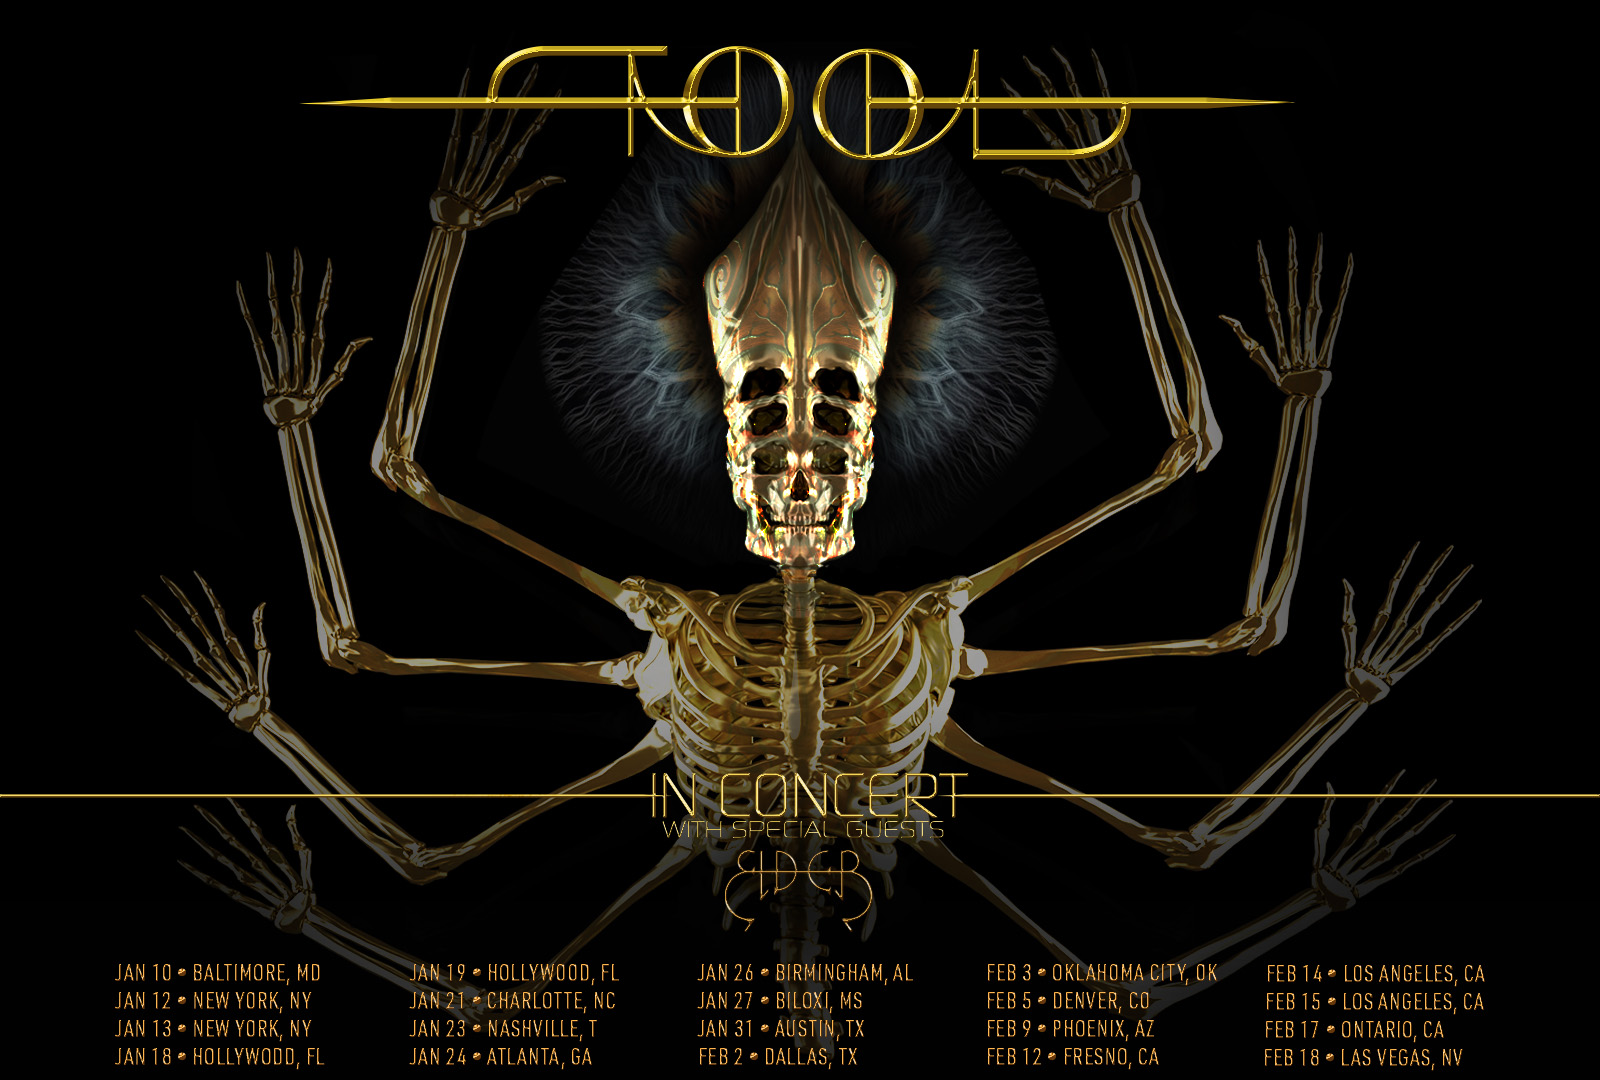 Tool share 30th Anniversary "Undertow" limited release available